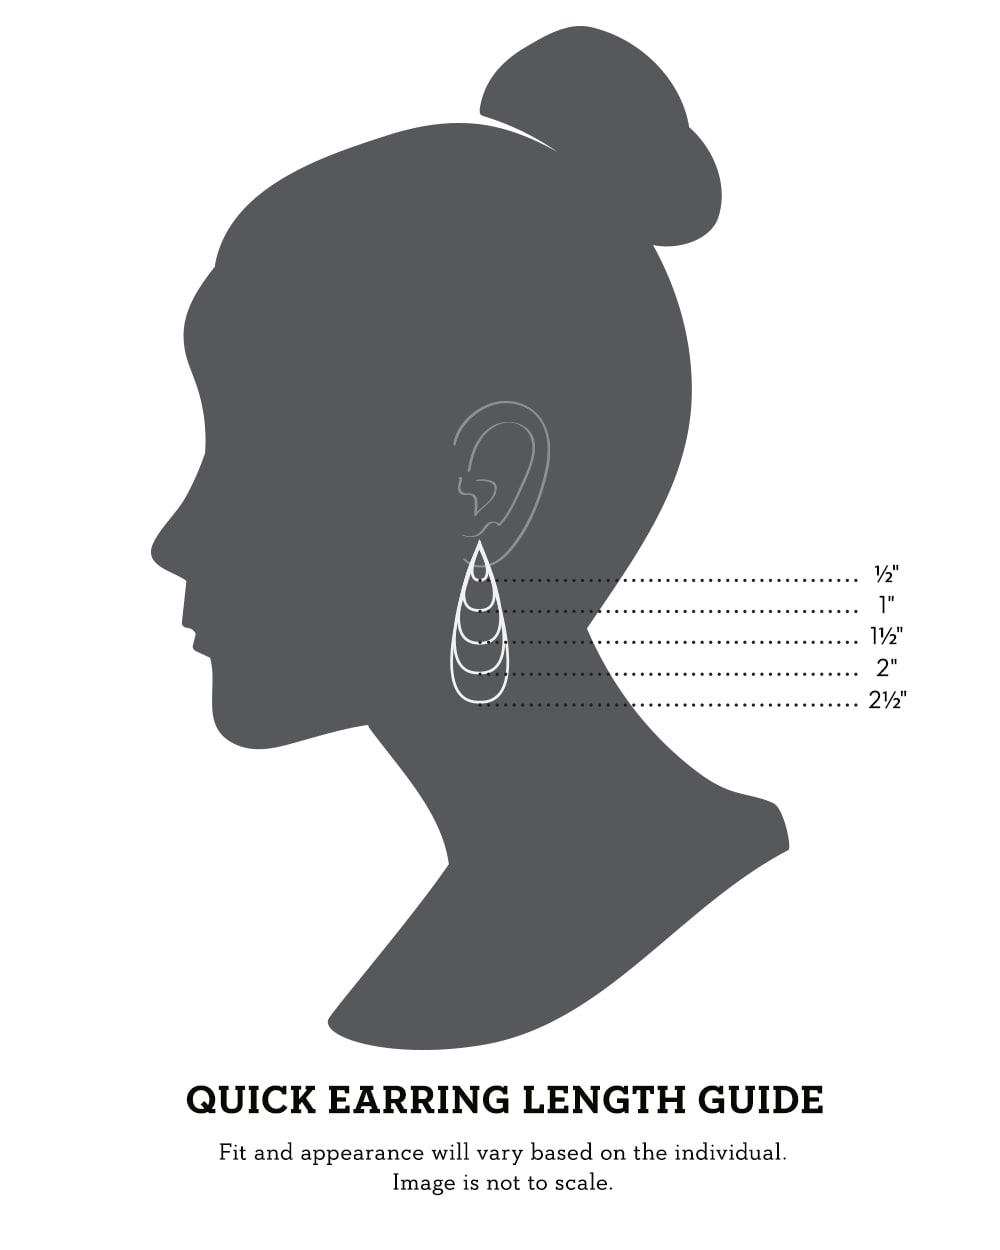 Quick earring length guide. Fit and appearance will vary based on the individual. Image is not to scale.